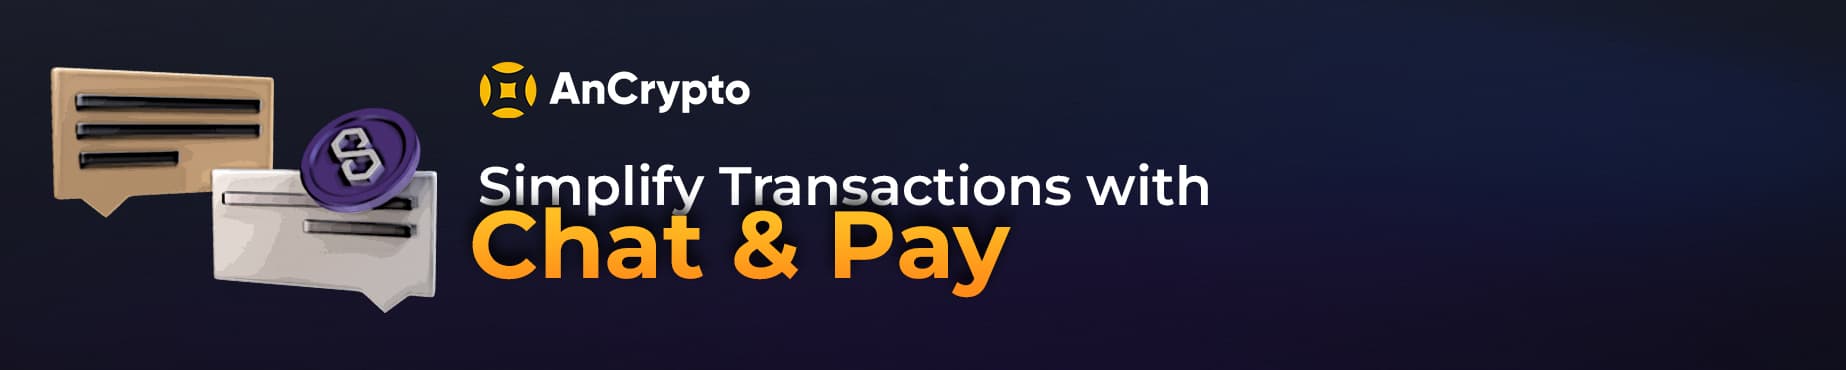 simple transactions with chat and pay cta button